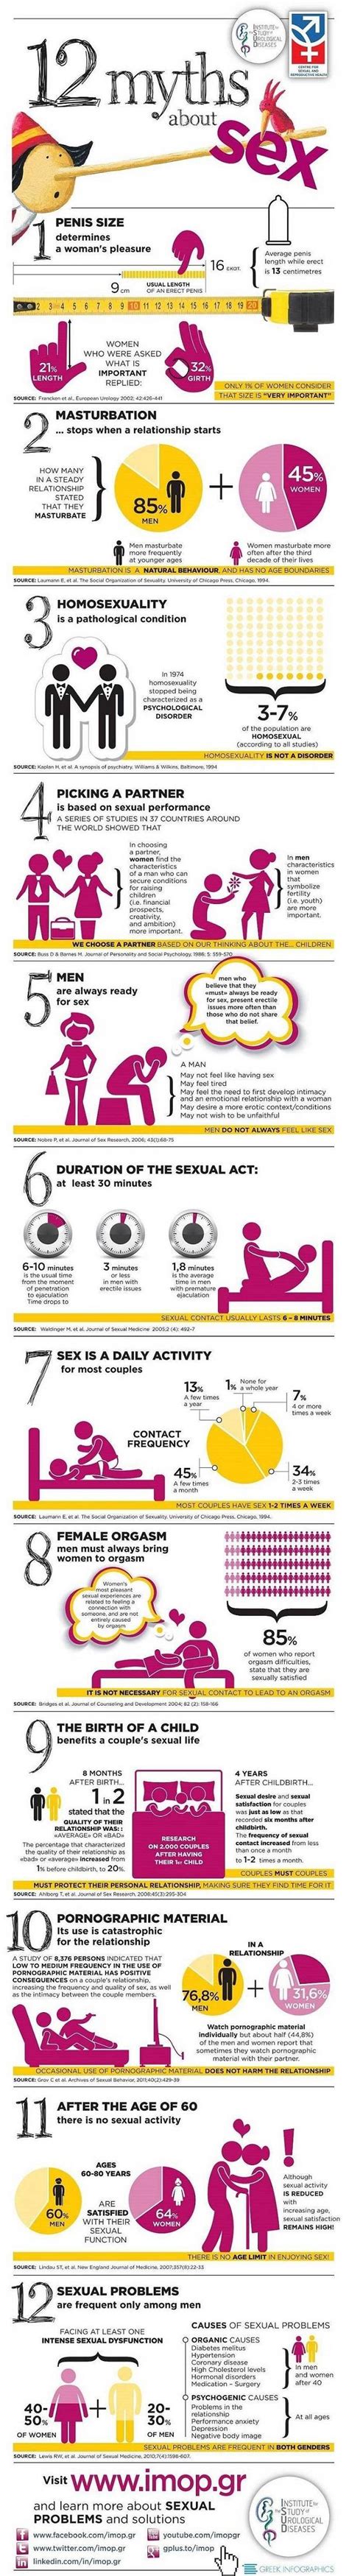 12 common myths about sex debunked infographic